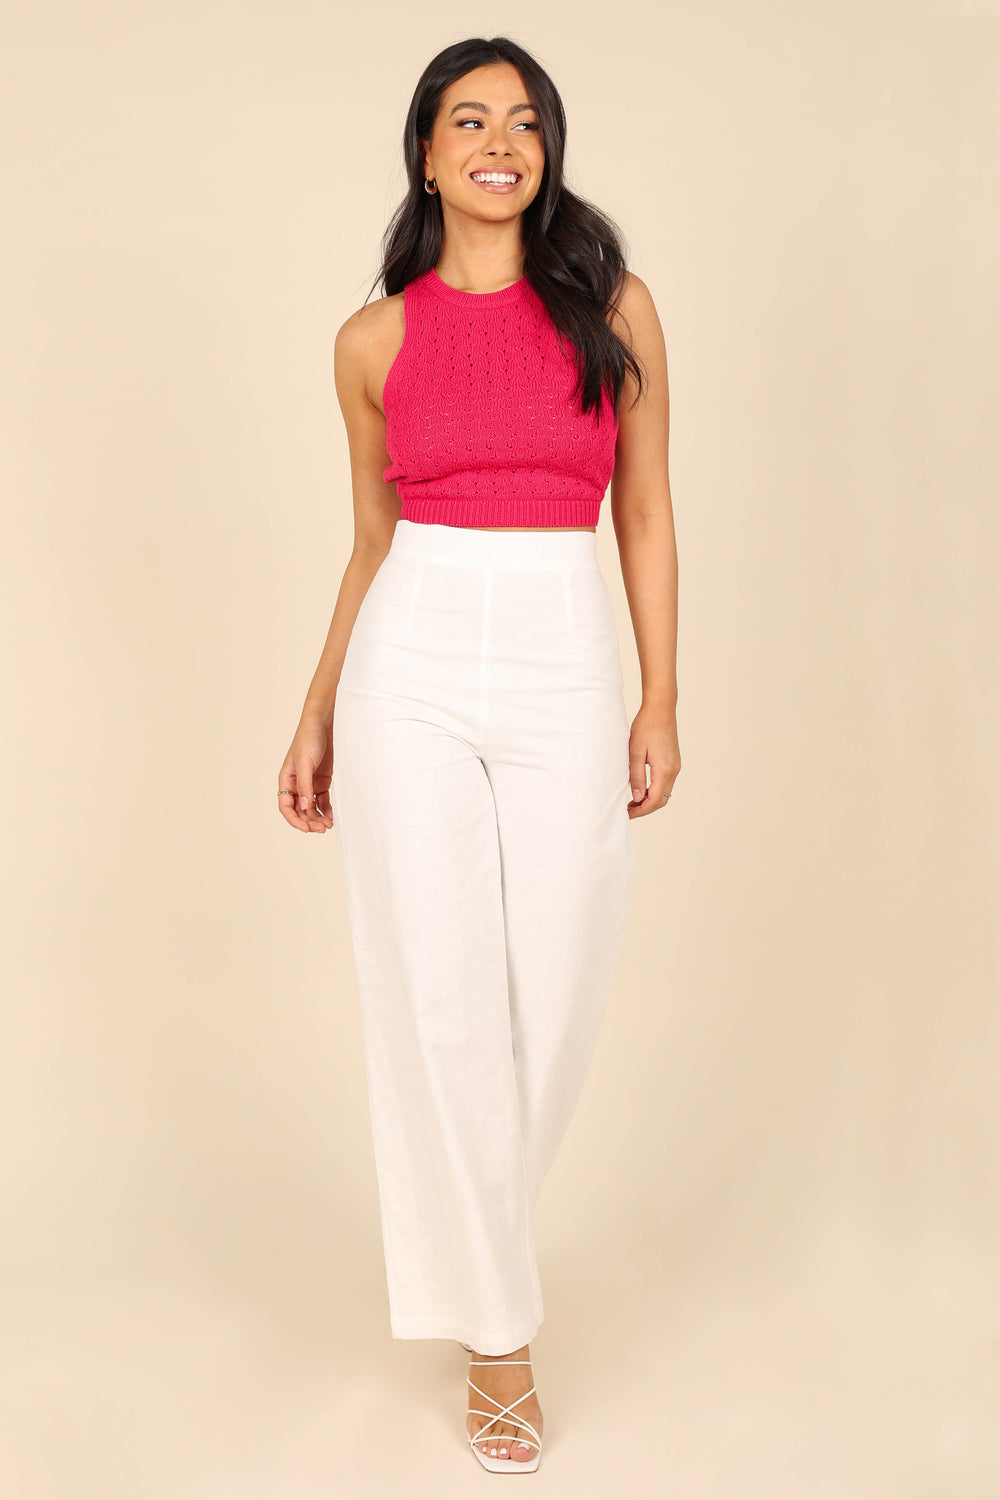 TOPS Sole Crochet Cropped Top - Berry